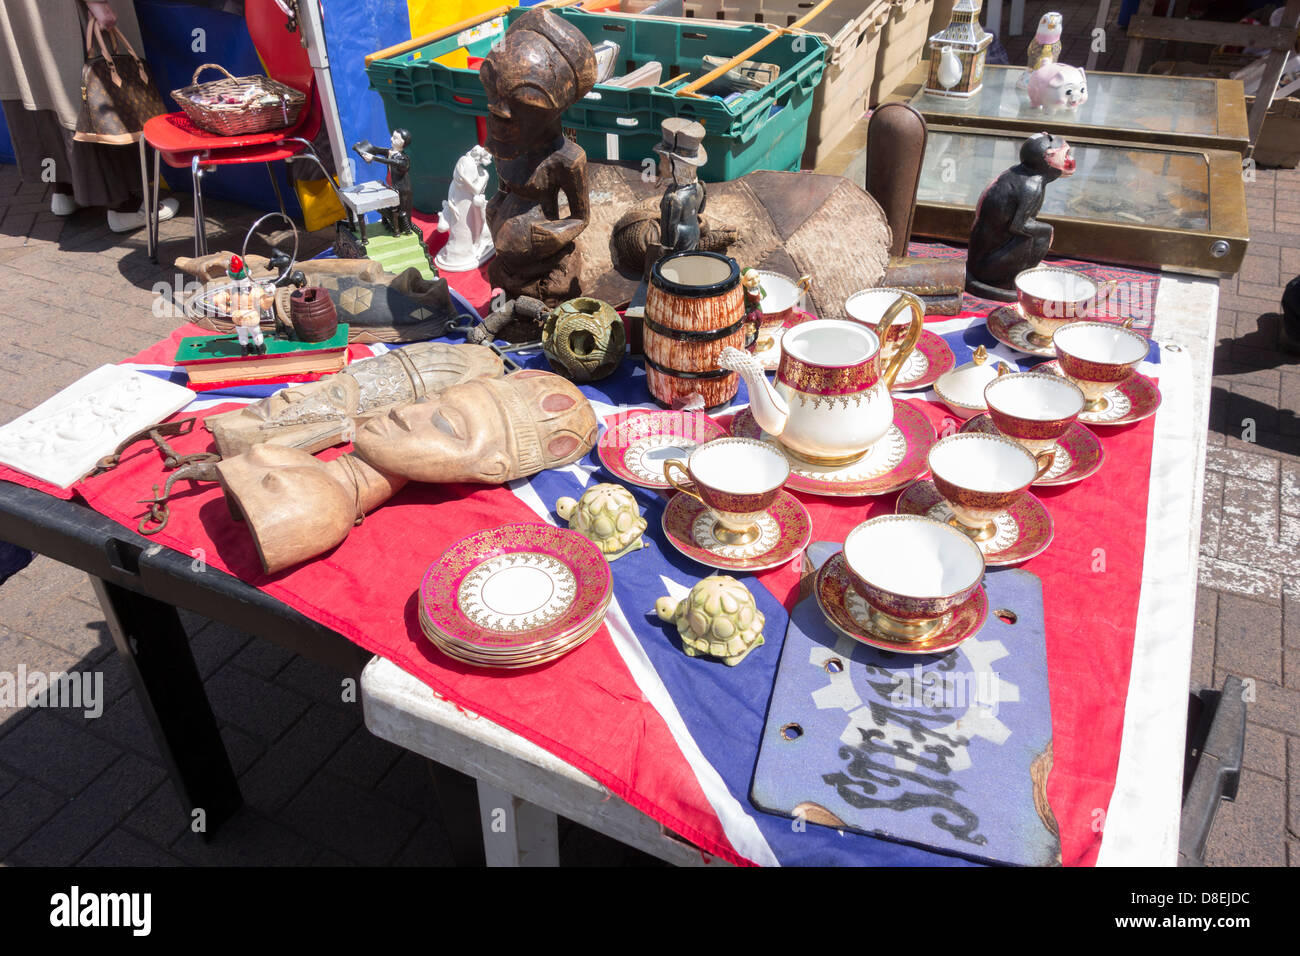 Antiques and bric a brac items on display on a market stall Stock Photo